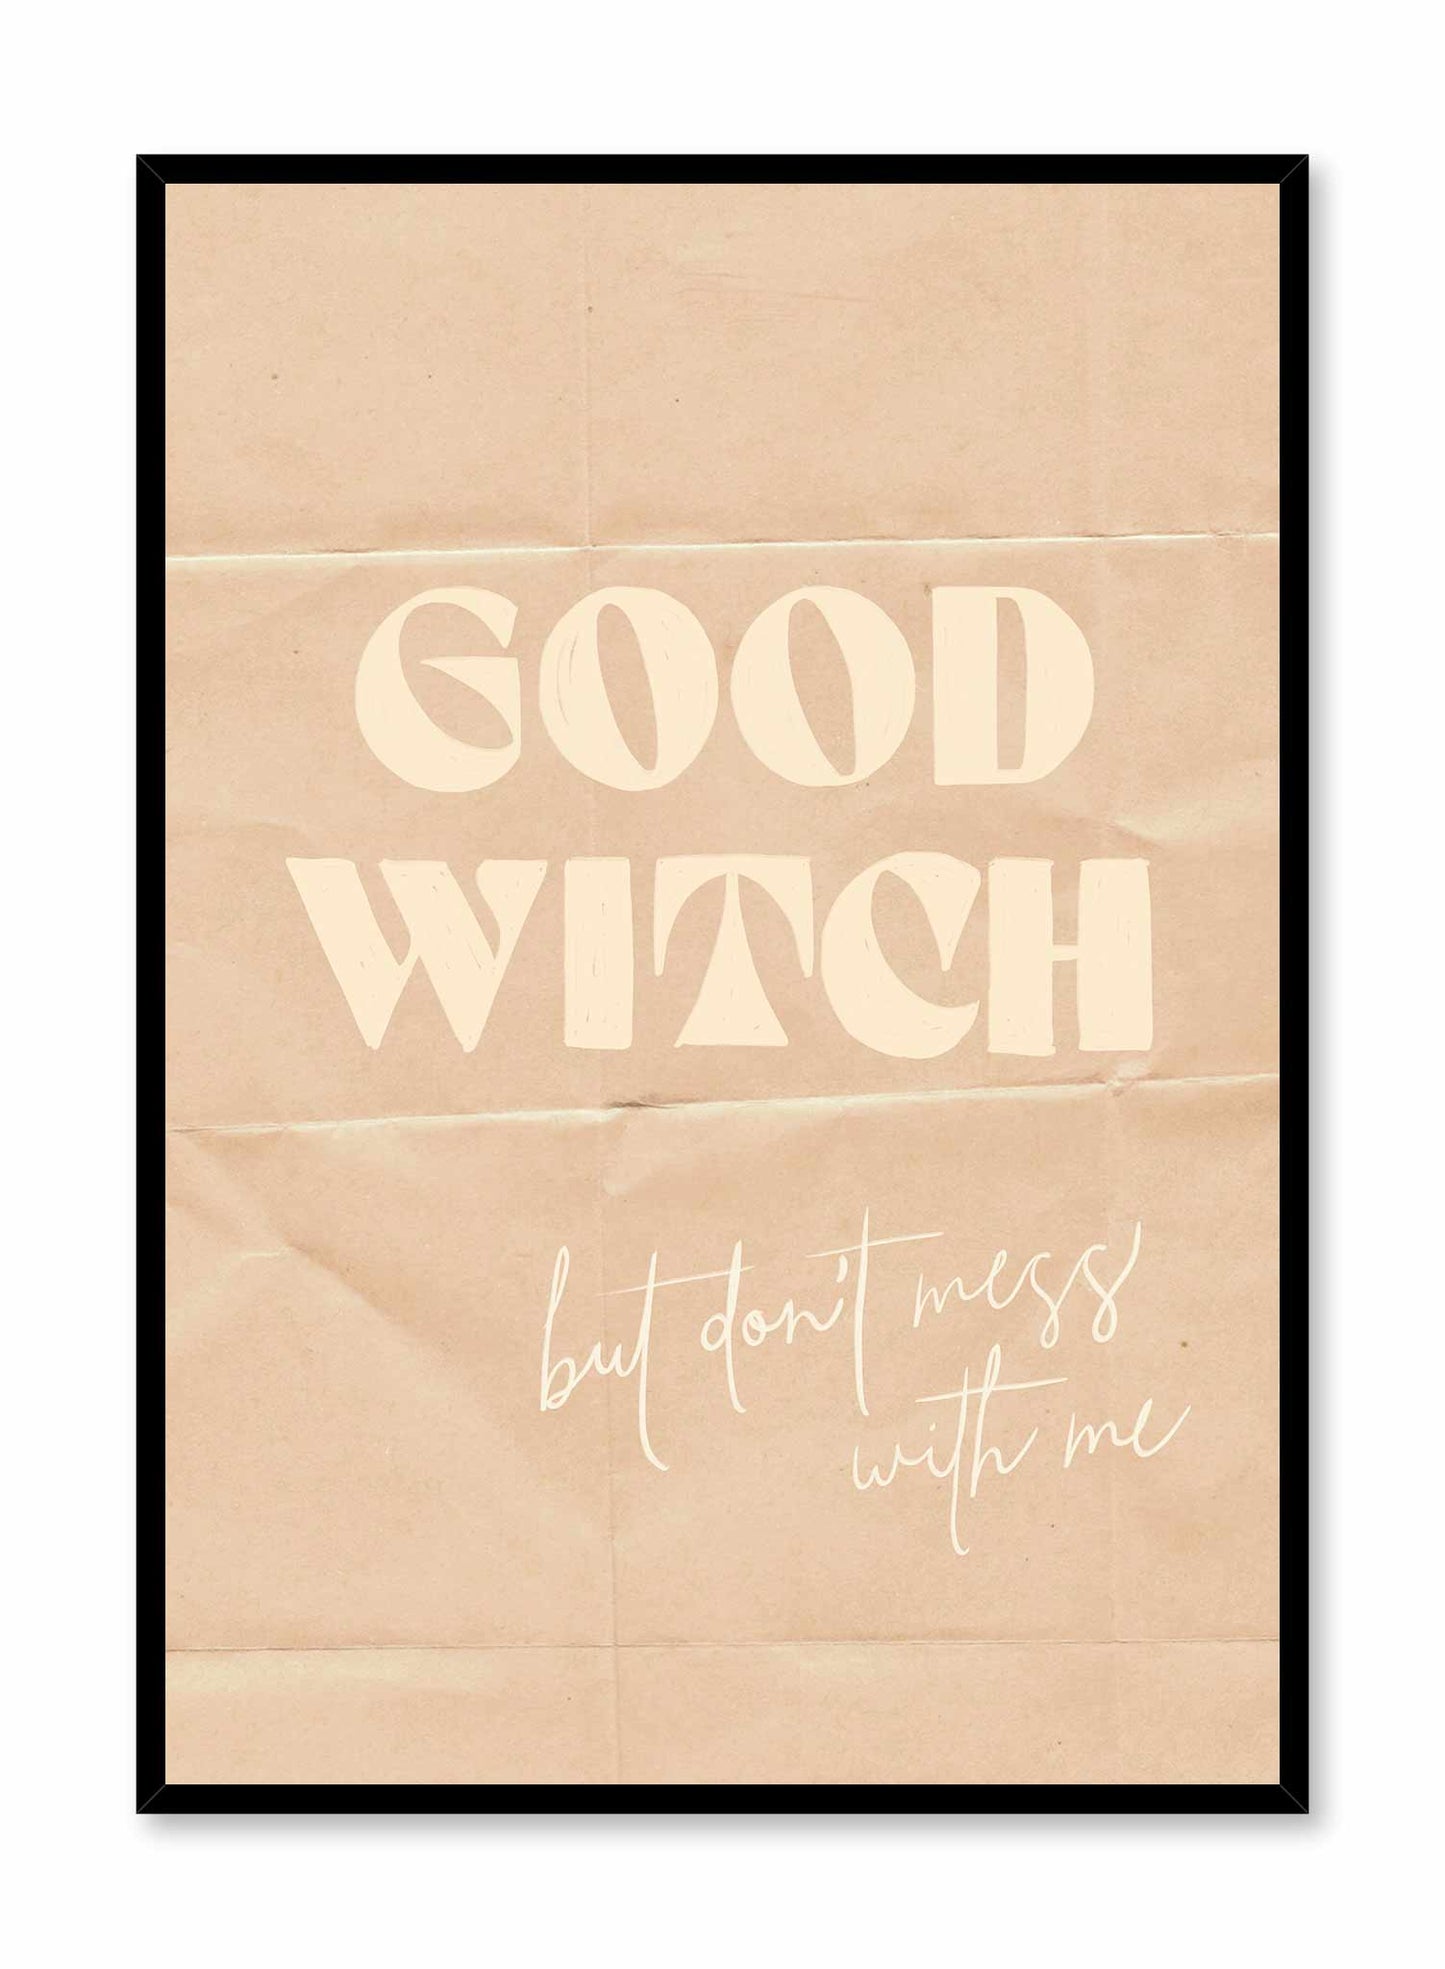 Bewitched is an typography and illustration of the words 'Good Witch' and 'but don't mess with me' on a folded beige paper by Audrey Rivet in collaboration with Opposite Wall.